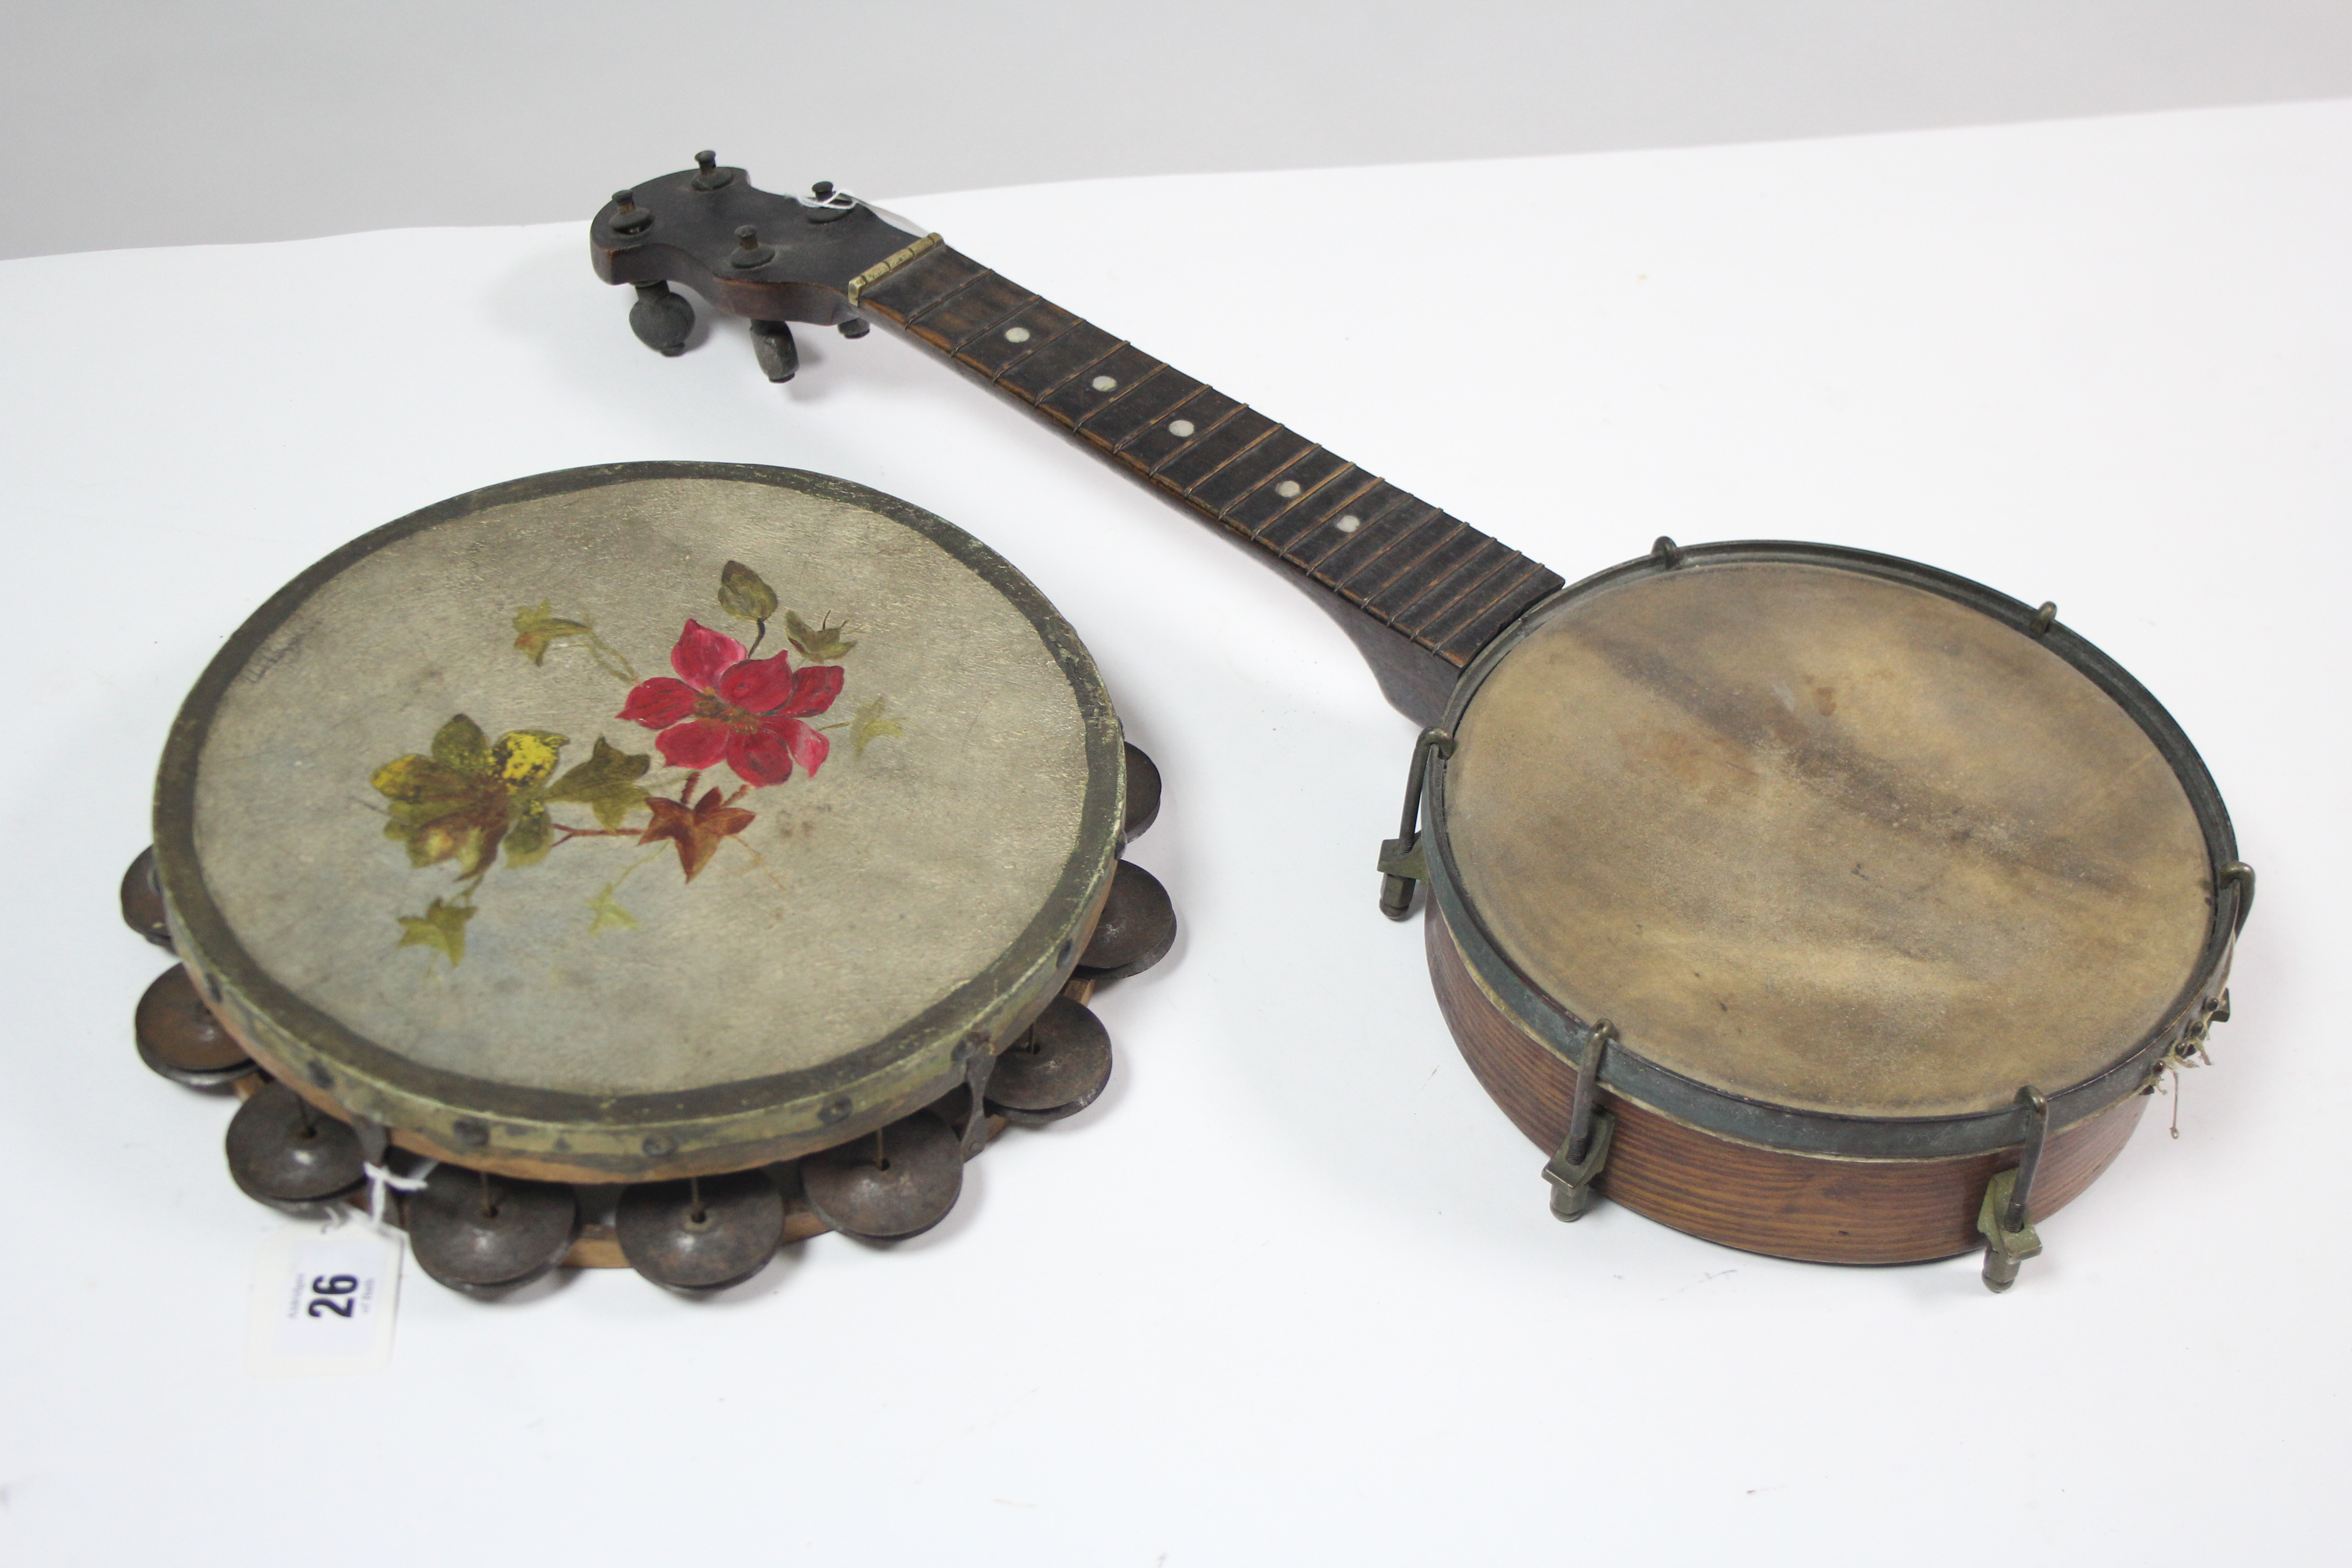 A banjolele (lacking strings), 21" long; & a tambourine with painted floral decoration.